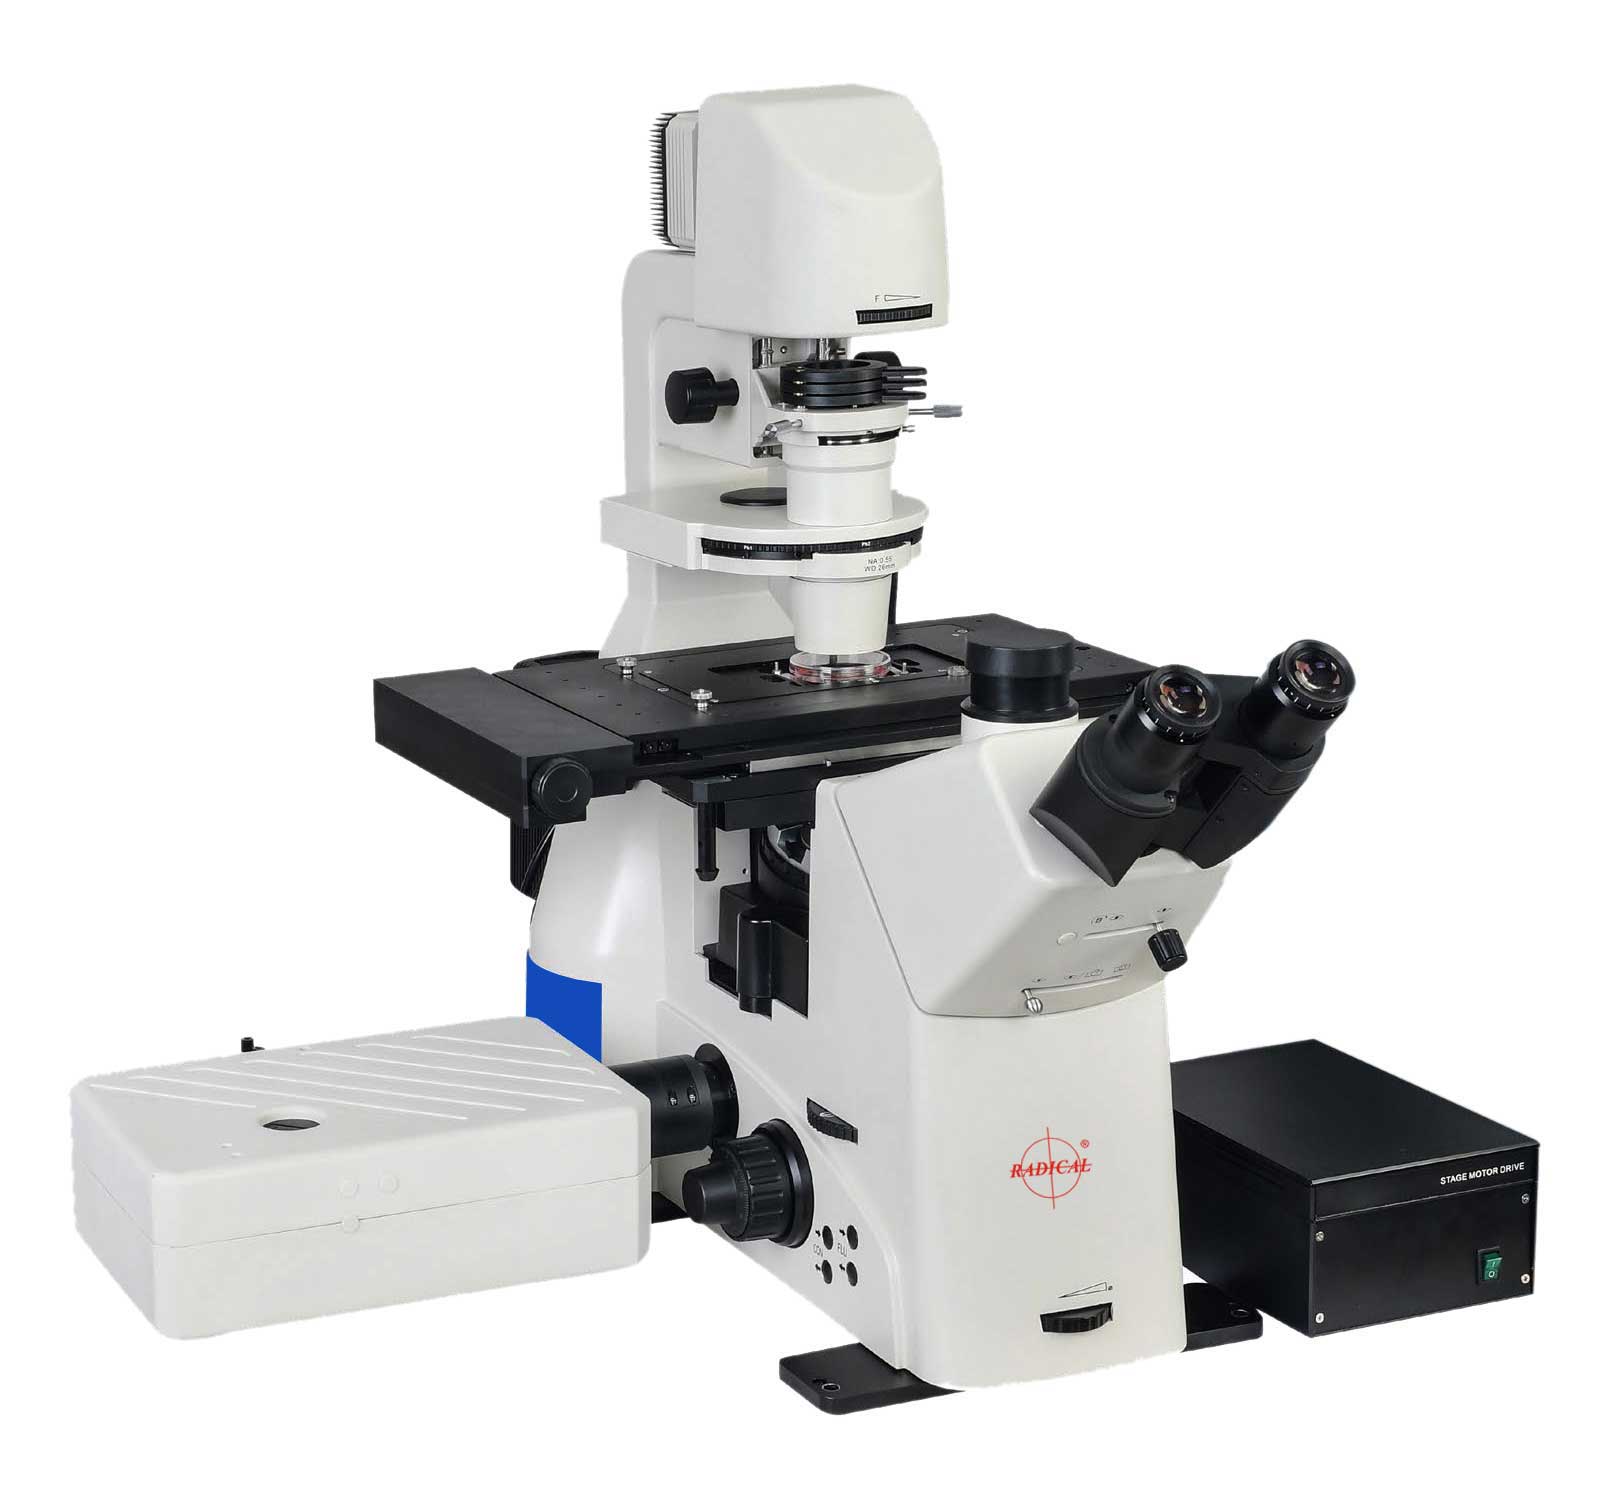 Radical Launches New Confocal Microscope